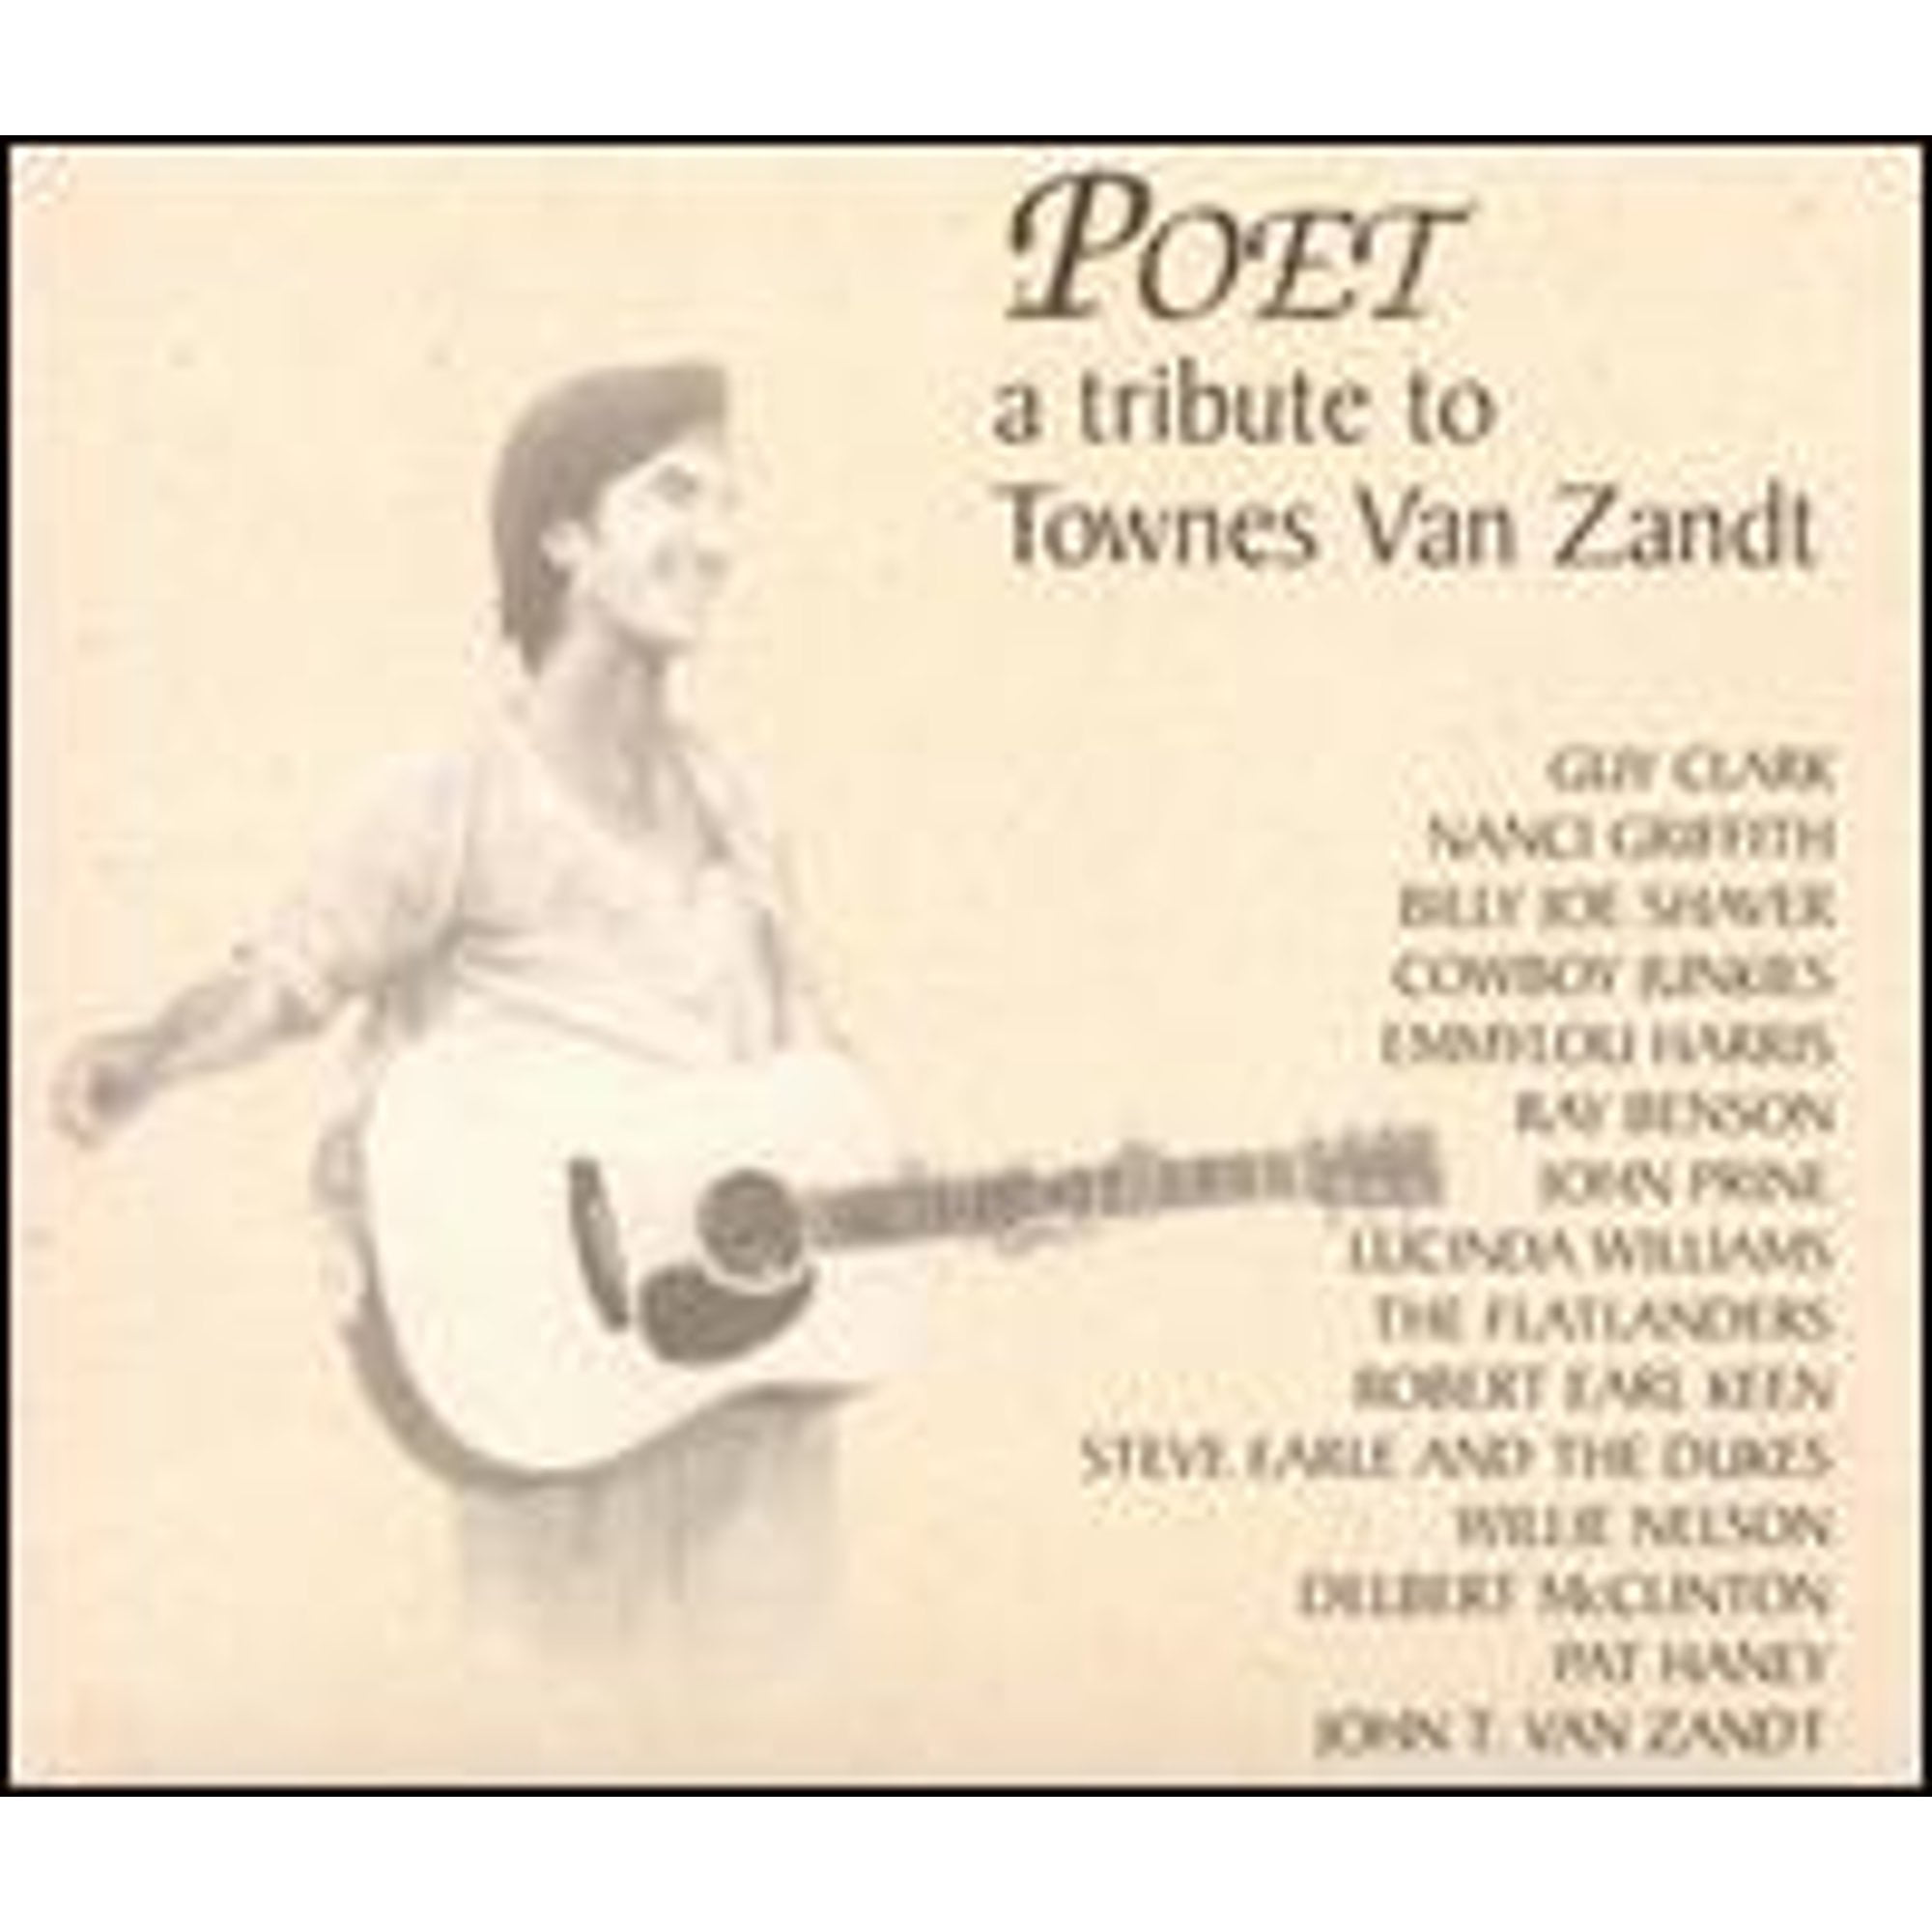 Poet: A Tribute to Townes Van Zandt (Pre-Owned CD 0688197701926) by ...